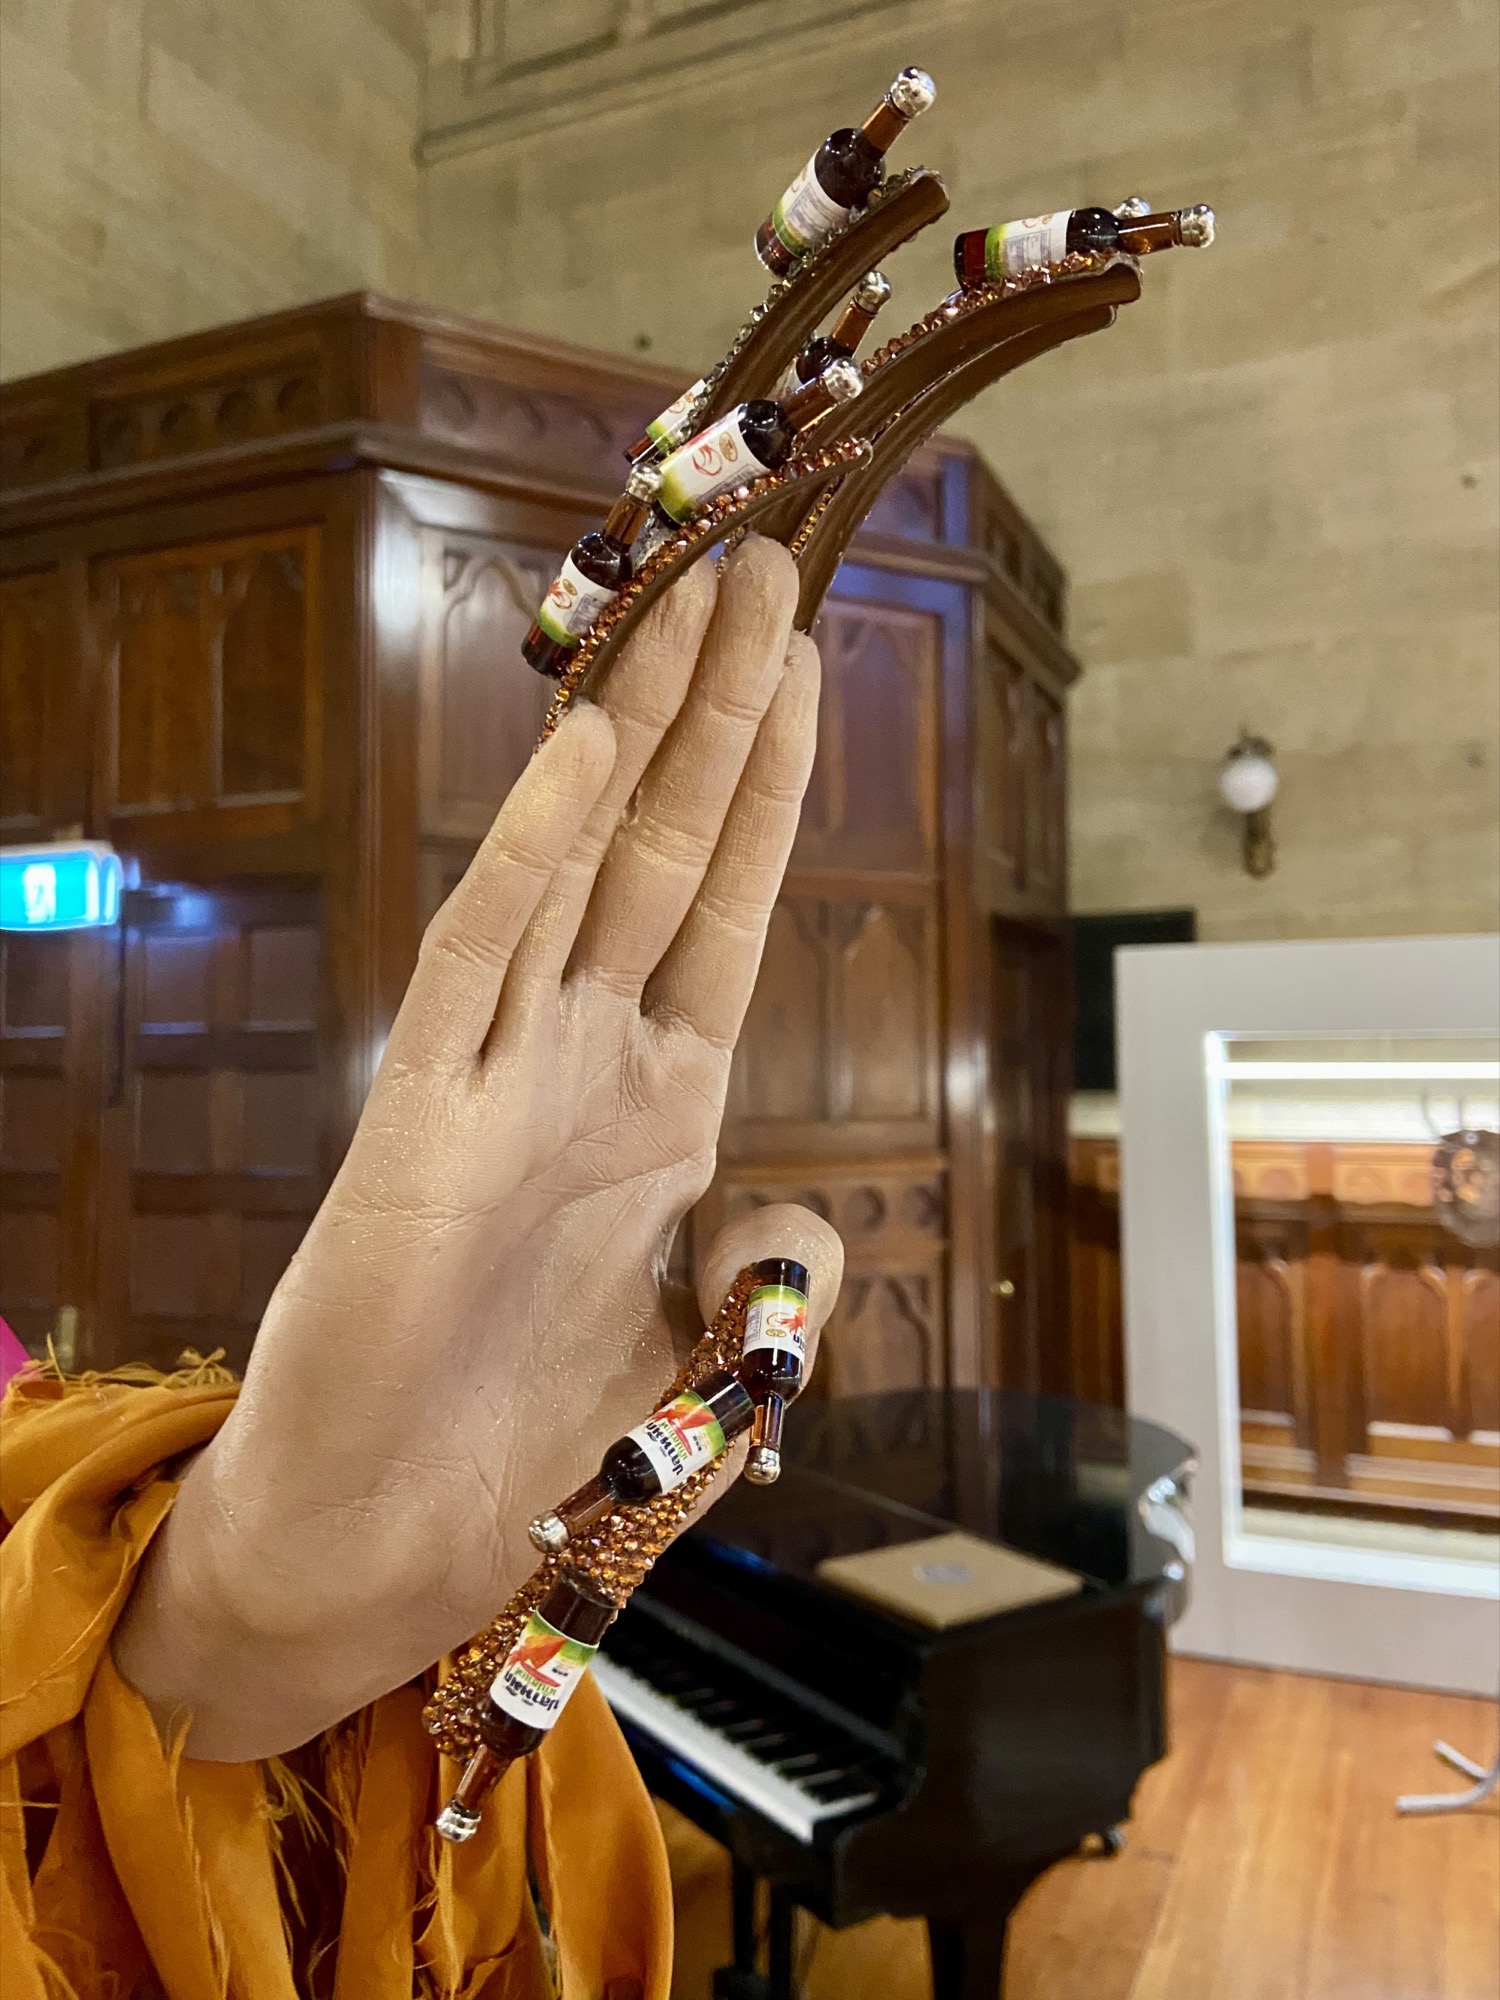 Nathan Beard, <em>Limp-wristed Gesture (ii)</em>, 2020 Silicone, found objects, acrylic nails, Swarovski elements, cotton, wax, Fenty Beauty, Tom Ford Beauty, nail polish, painted steel. Dimensions variable. Courtesy FUTURES